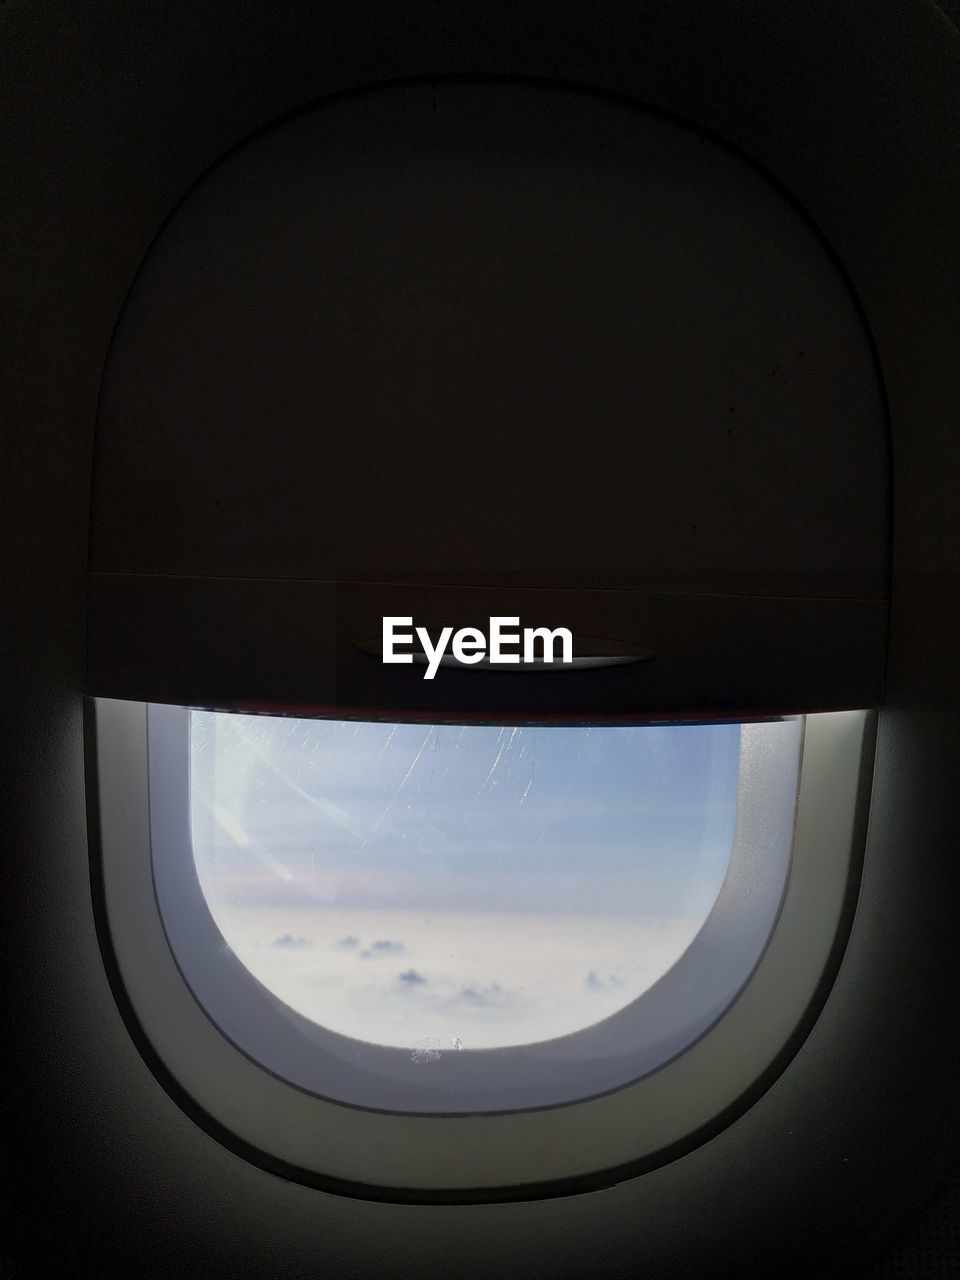 VIEW OF AIRPLANE WINDOW